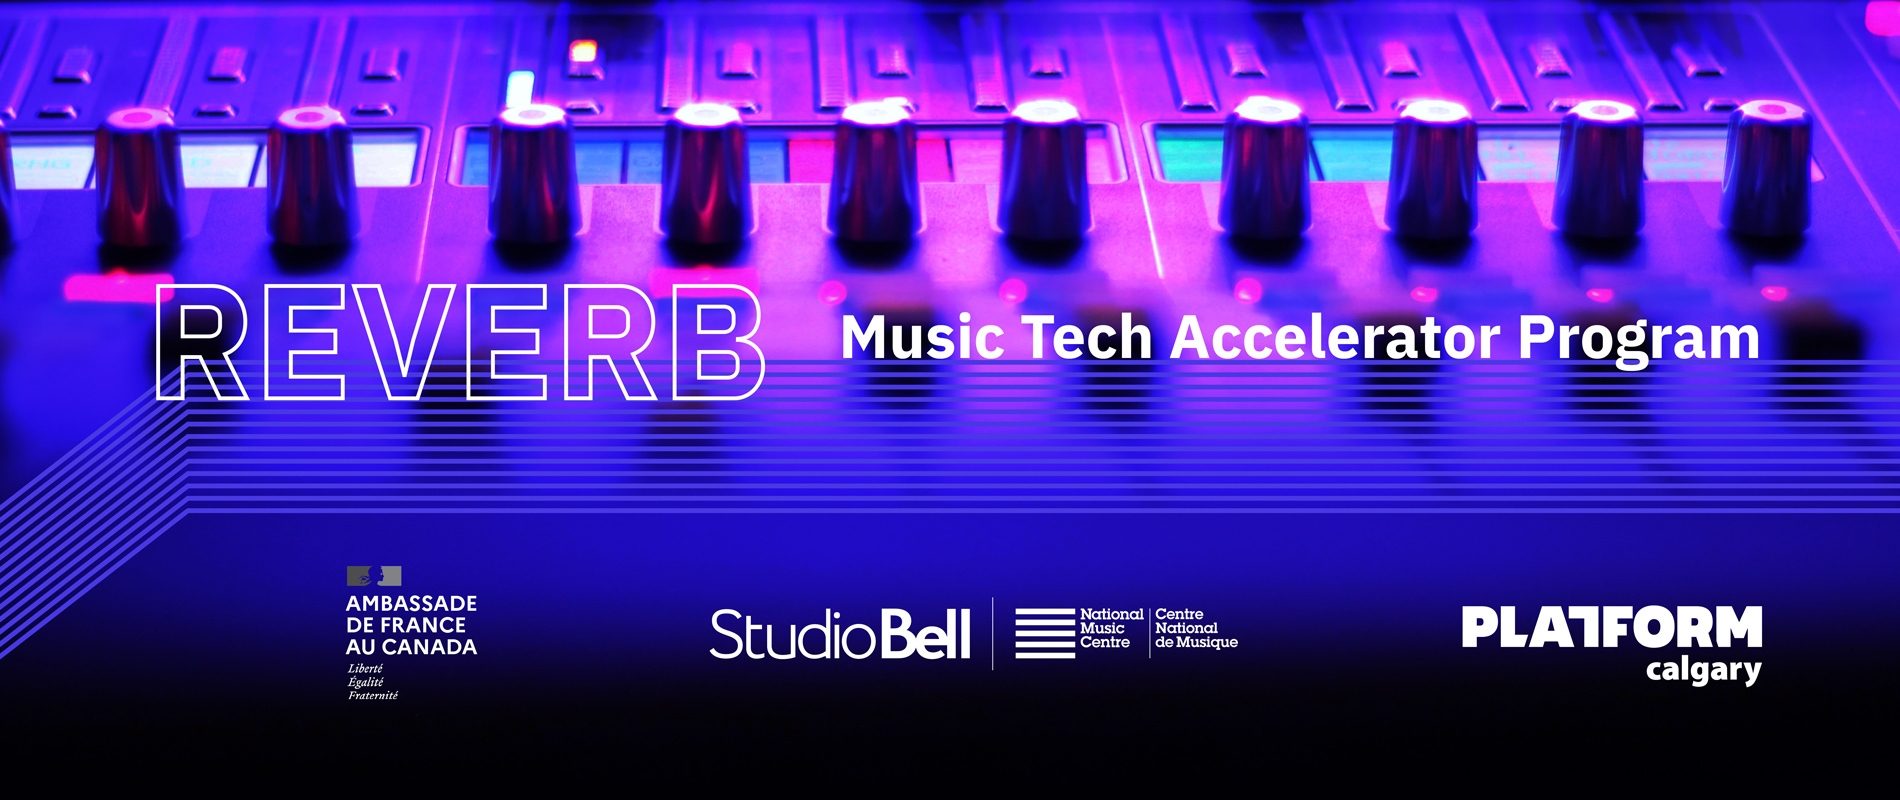 Participants Selected for New Music Tech Startup Accelerator in Calgary